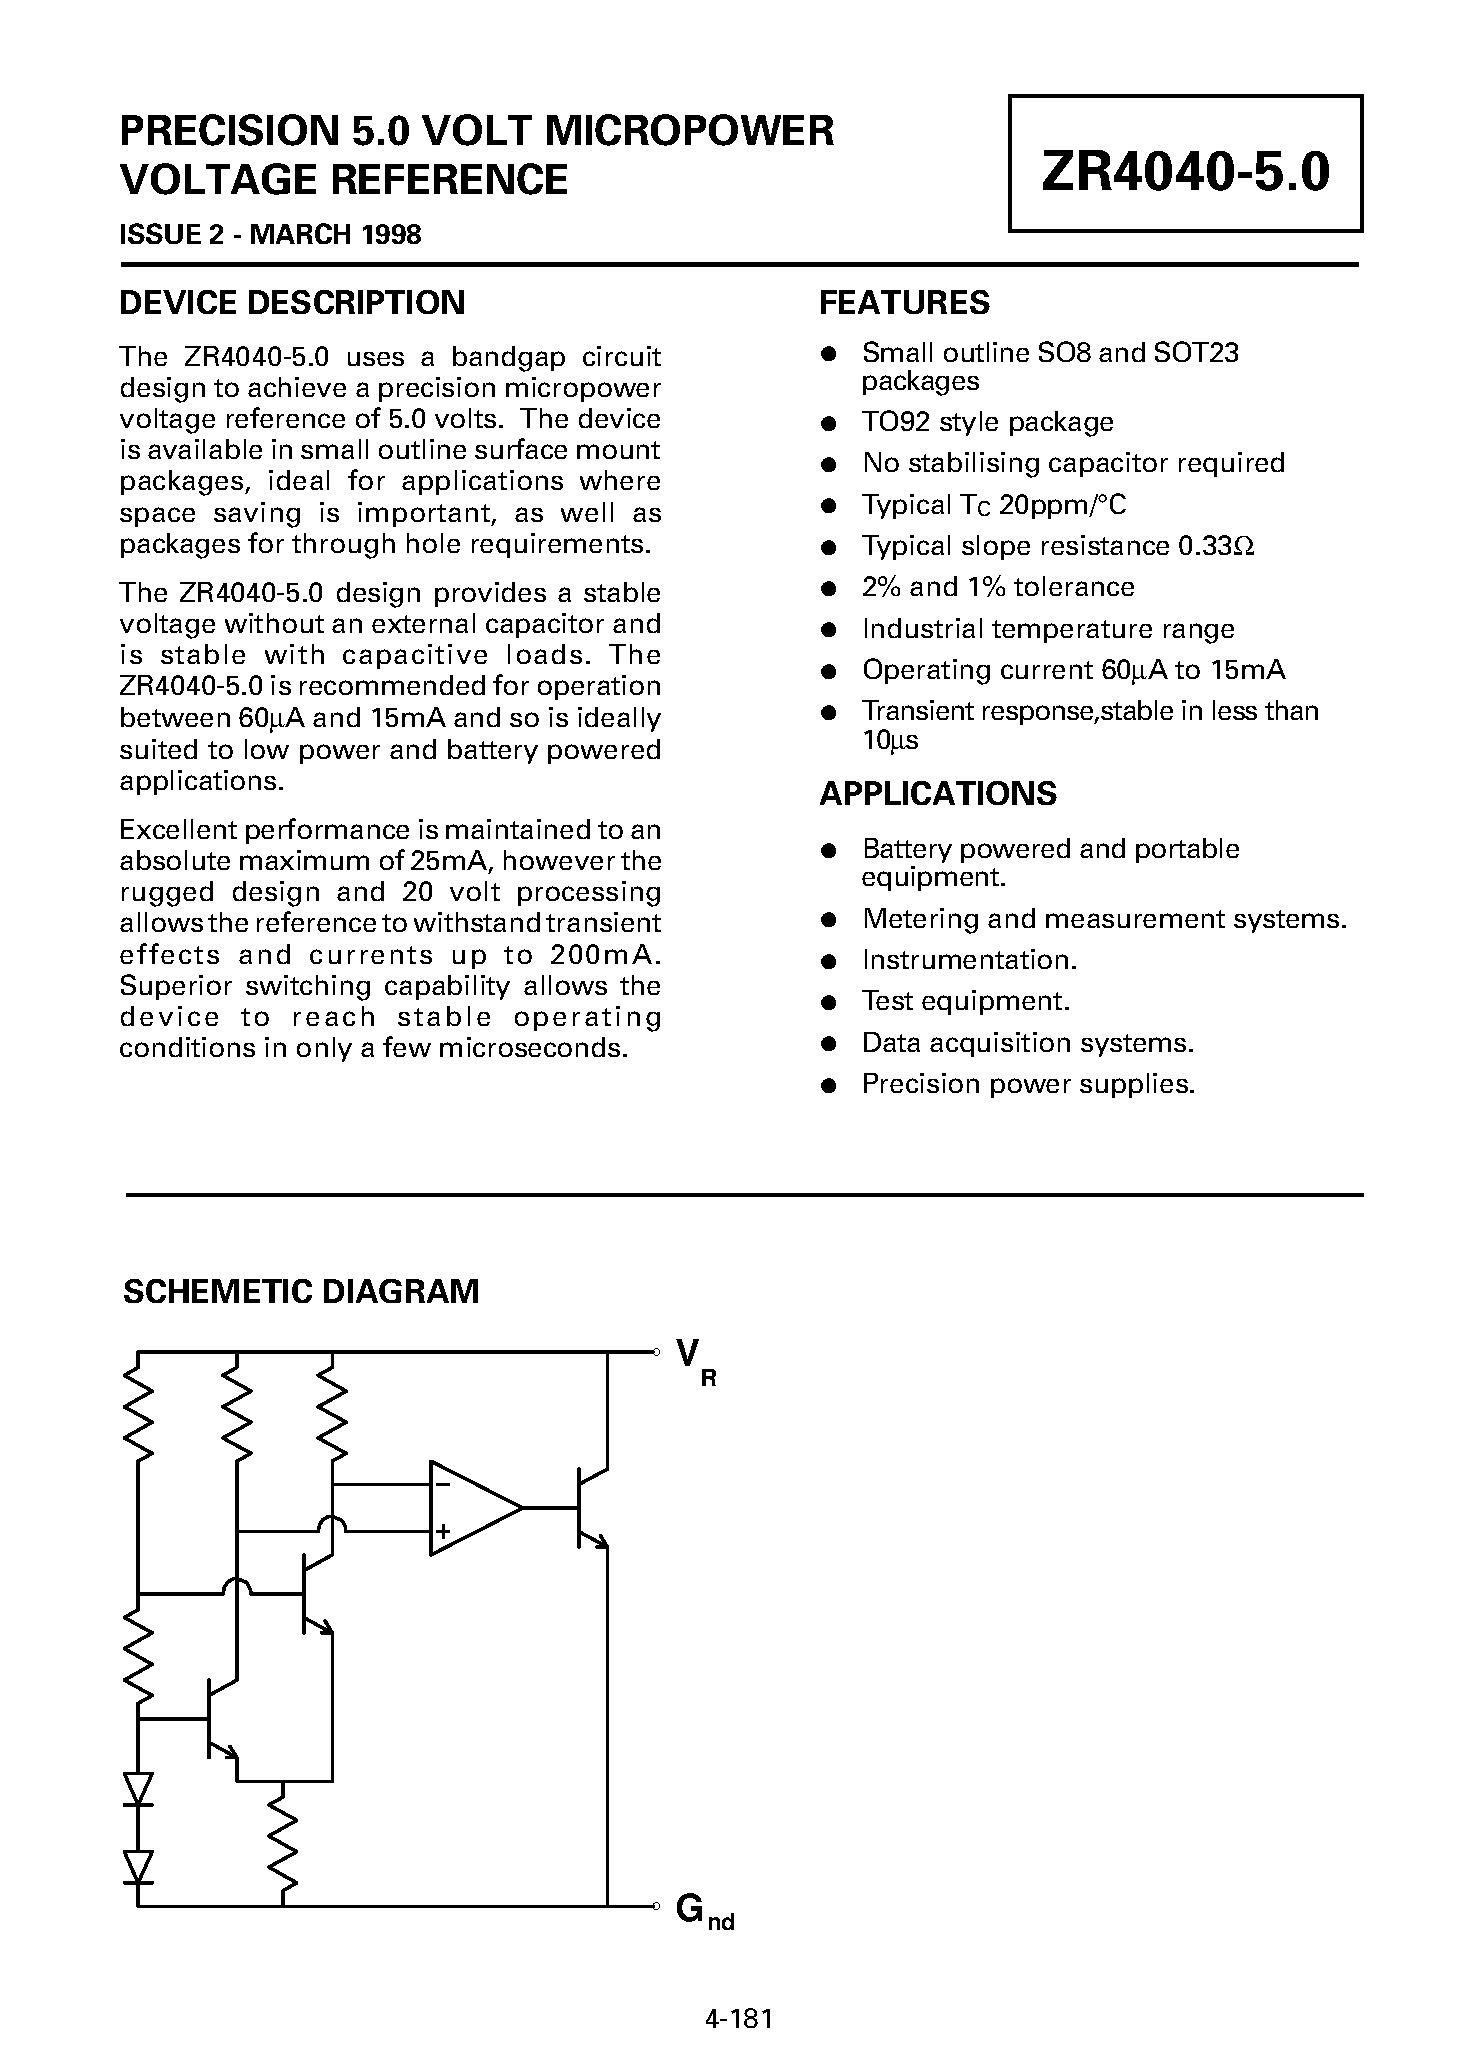 Datasheet ZR40401F50 - PRECISION 5.0 VOLT MICROPOWER VOLTAGE REFERENCE page 1